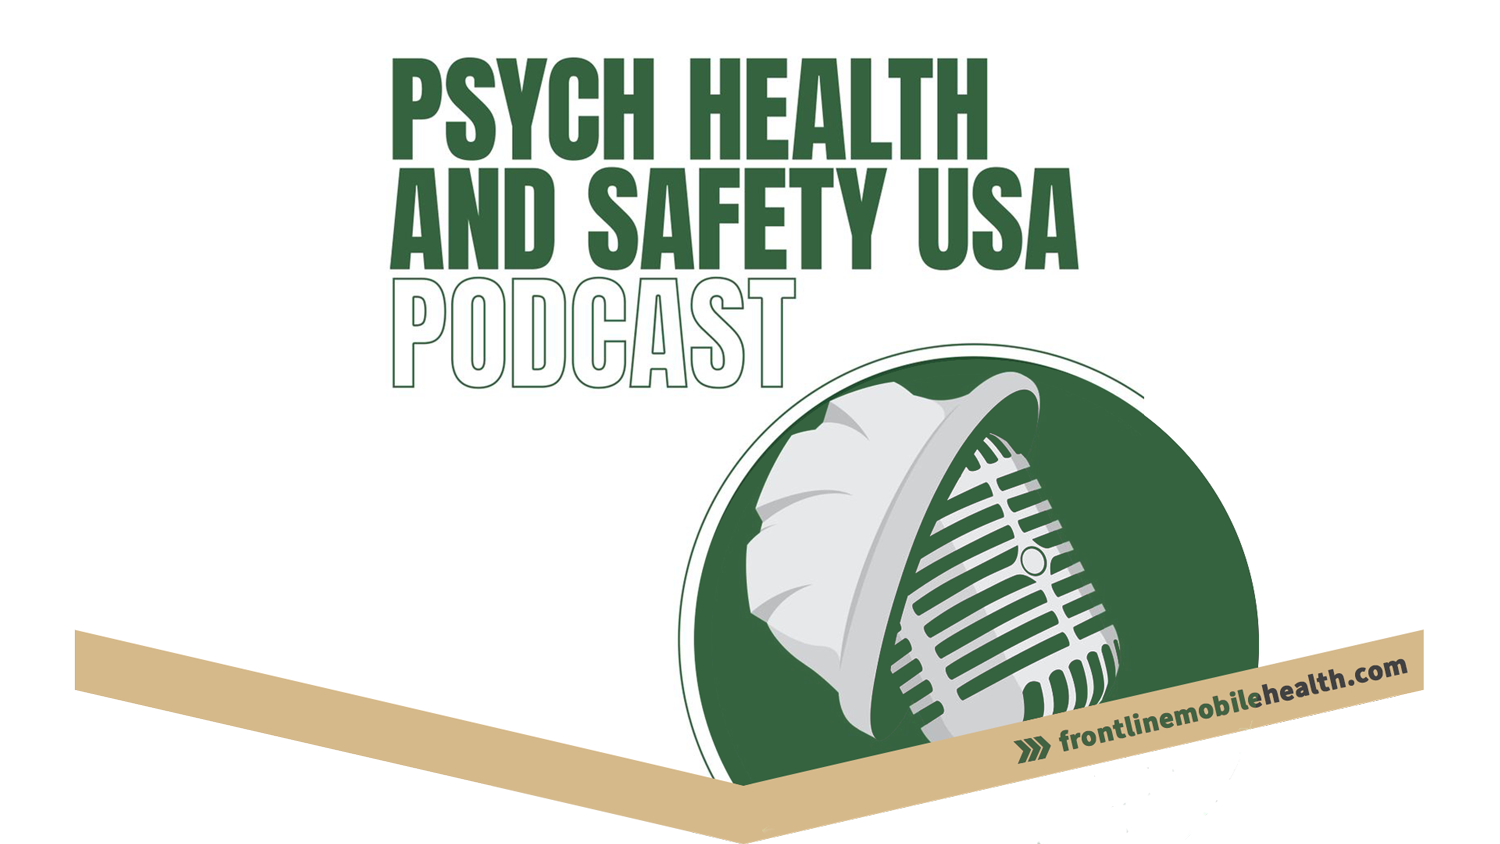 Front LIne Mobile Health Podcast on Psychological health for fire departmenrs